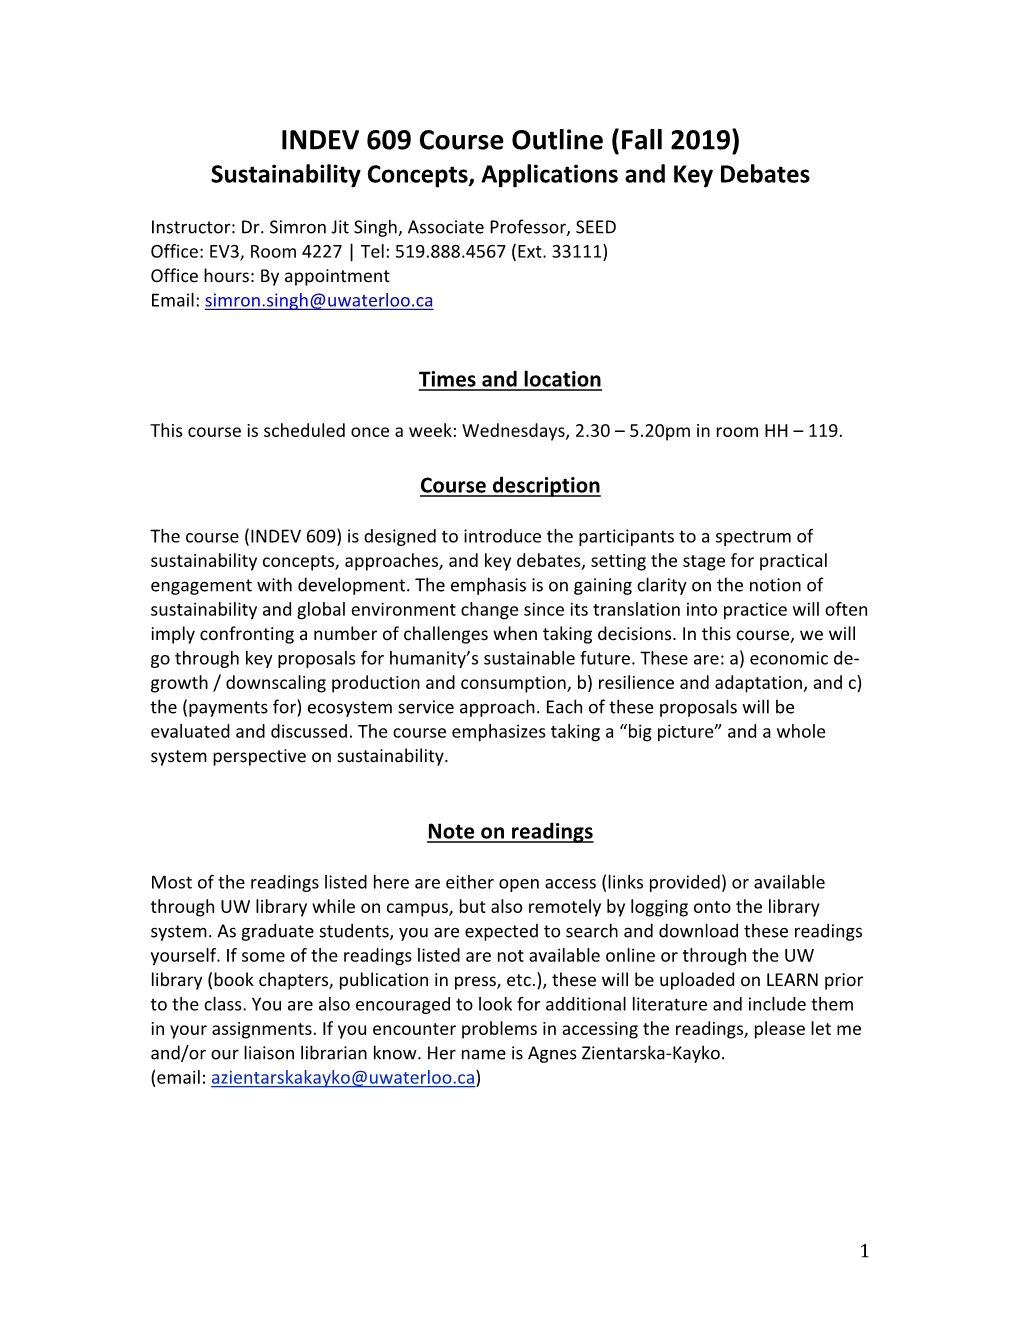 INDEV 609: Sustainability Concepts, Applications & Key Debates